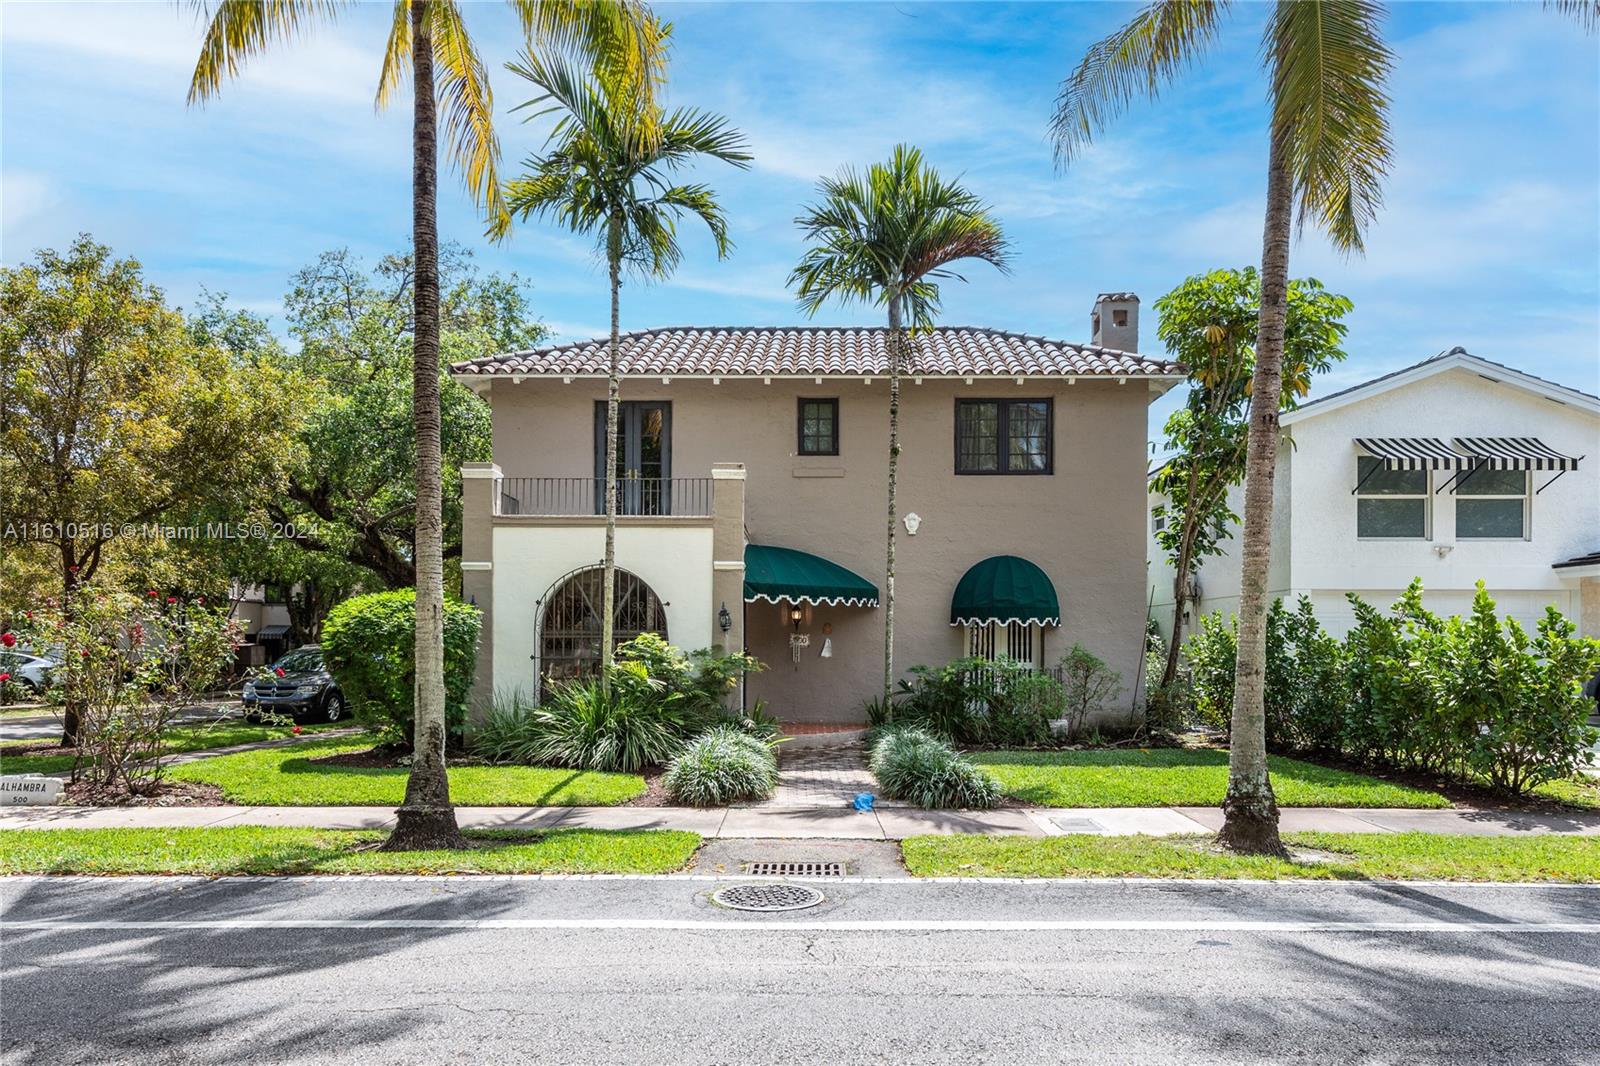 This 1927 home is a Mediterranean Revival home with approx. 2,756 adj. sq. ft. You enter a foyer that leads to a large living room with a fireplace and exposed wood beams on the ceiling. From the living room, is a beautiful dining room, that leads into the kitchen with an eat-in area. The kitchen has been updated to a country style, with a gas stove, 2 refrigerators, and a washer/dryer enclosed in the cabinets. Next is an office with a closet and half bath. Upstairs are four nicely sized bedrooms all with hardwood floors. There are two baths and the closets are very generously sized and updated. Impact windows and hurricane panels. The roof is from 2010. The house is on a 5,000 sq. ft. lot with a 2-car garage and on public sewer, within walking distance to DT Coral Gables.